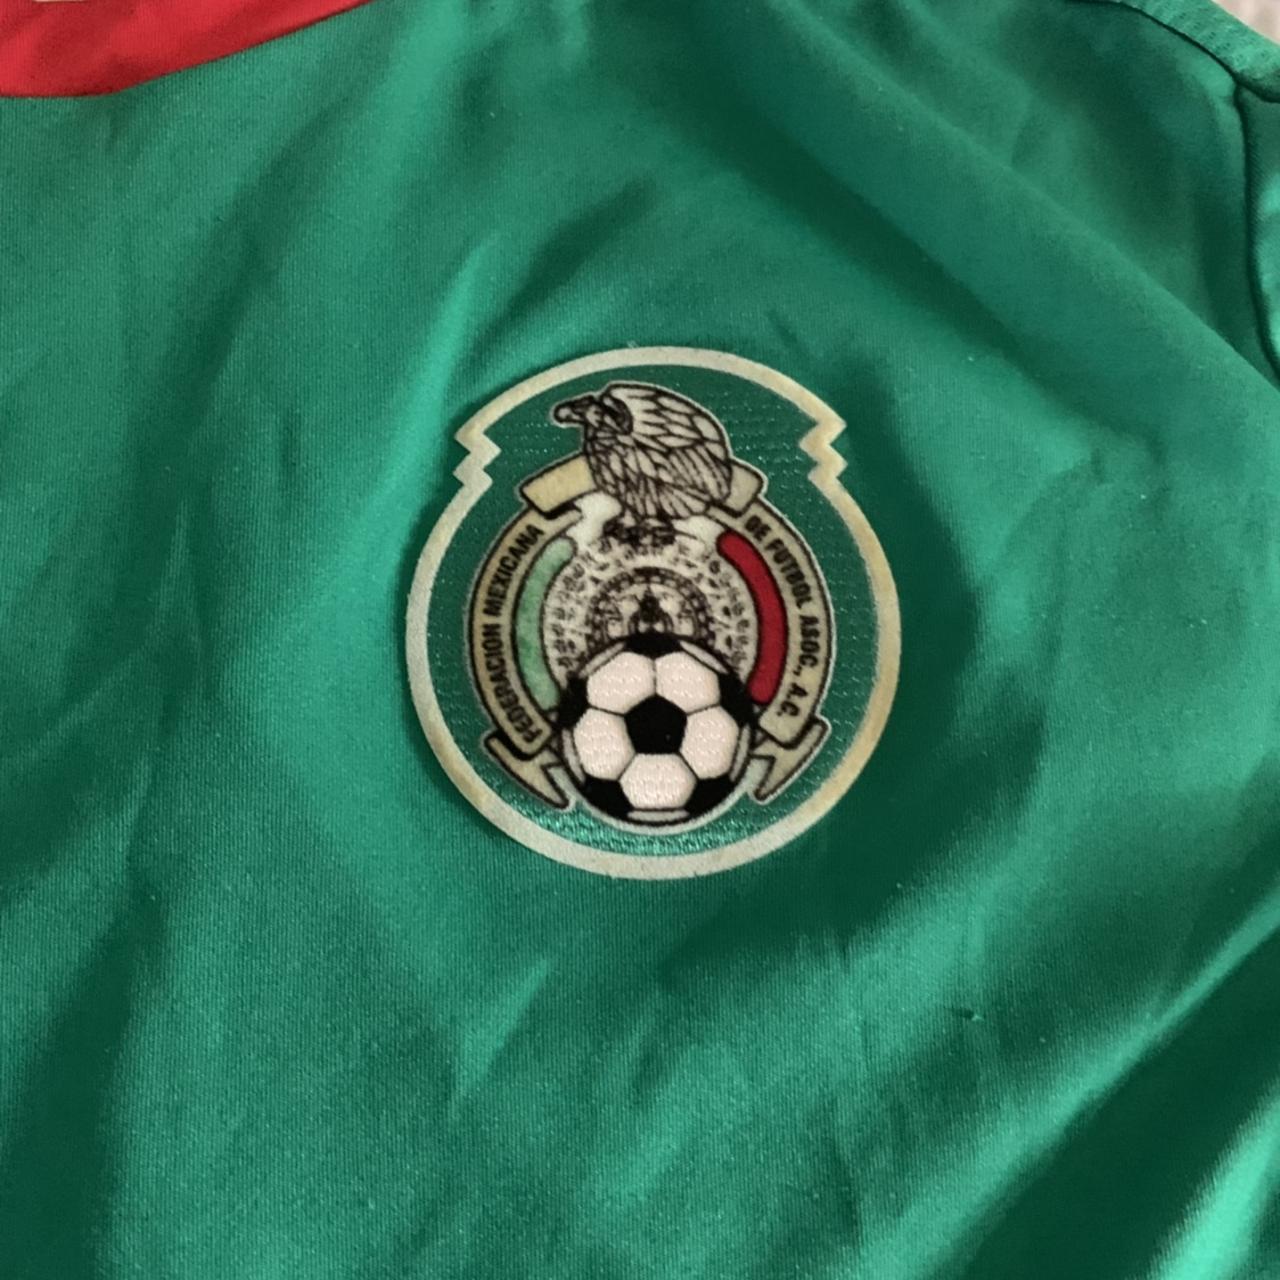 Mexico soccer jersey ♻️ABOUT THE ITEM: Seleccion - Depop